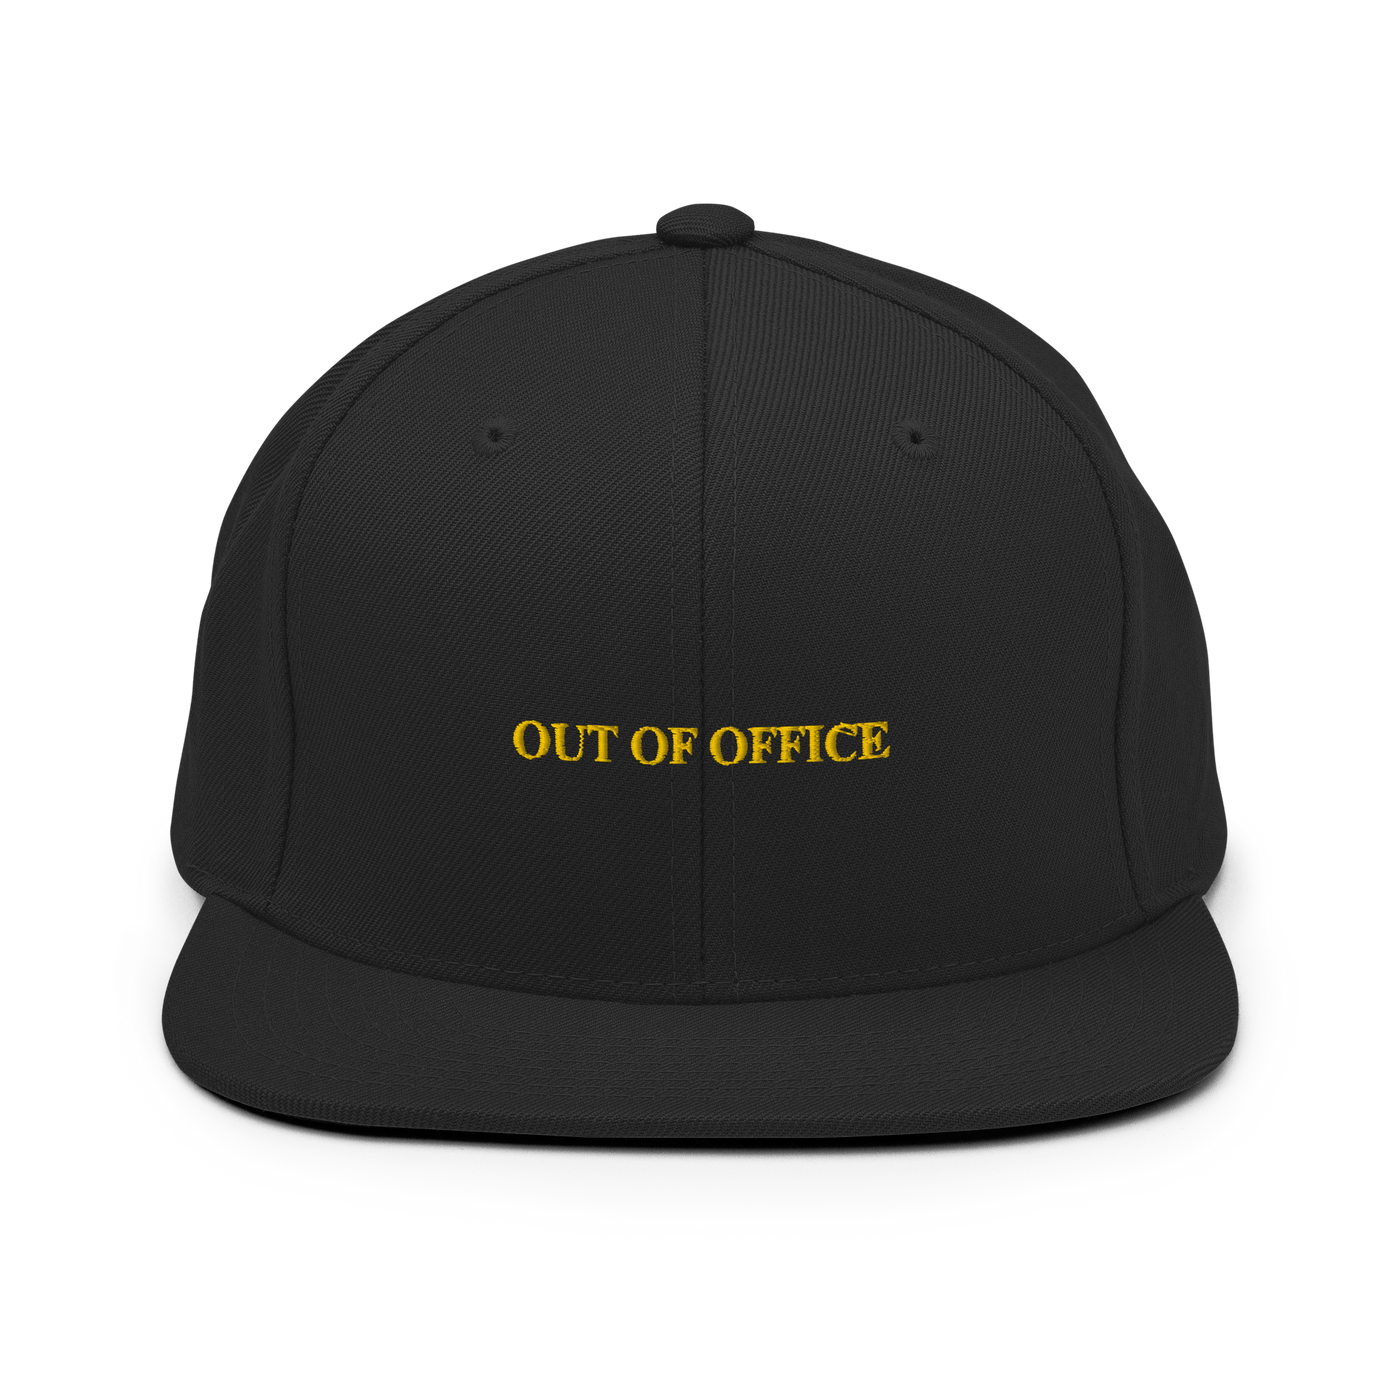 OUT OF OFFICE Snapback - Black - - Just Another Cap Store